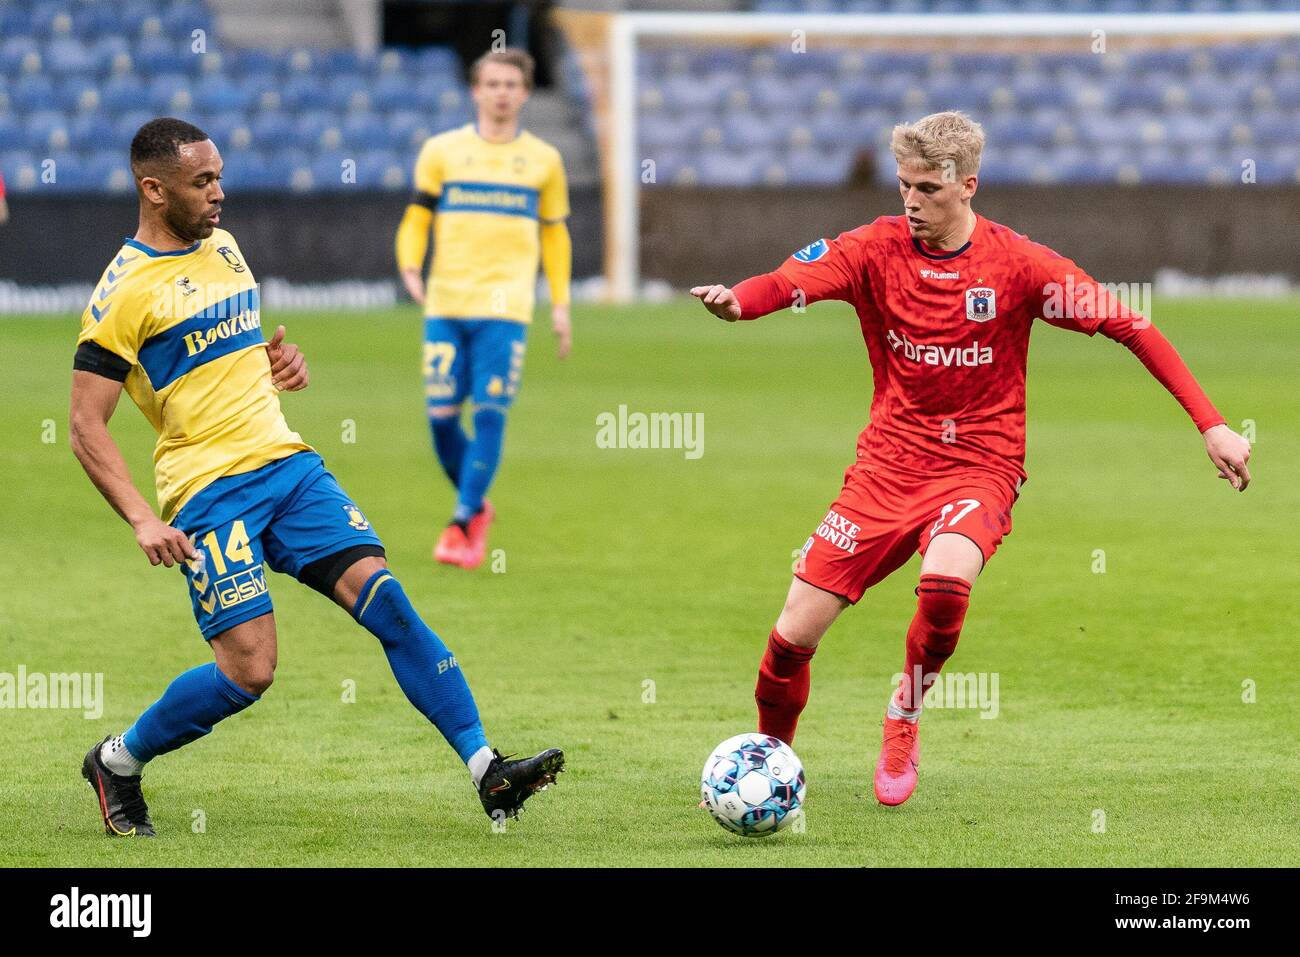 Brondby, Denmark. 18th Apr, 2021. Albert Gronbaek (27) of Aarhus GF and Kevin Mensah (14) of Brondby IF seen during the 3F Superliga match between FC Brondby IF and Aarhus GF Brondby Stadion in Brondby. (Photo Credit: Gonzales Photo/Alamy Live News Stock Photo